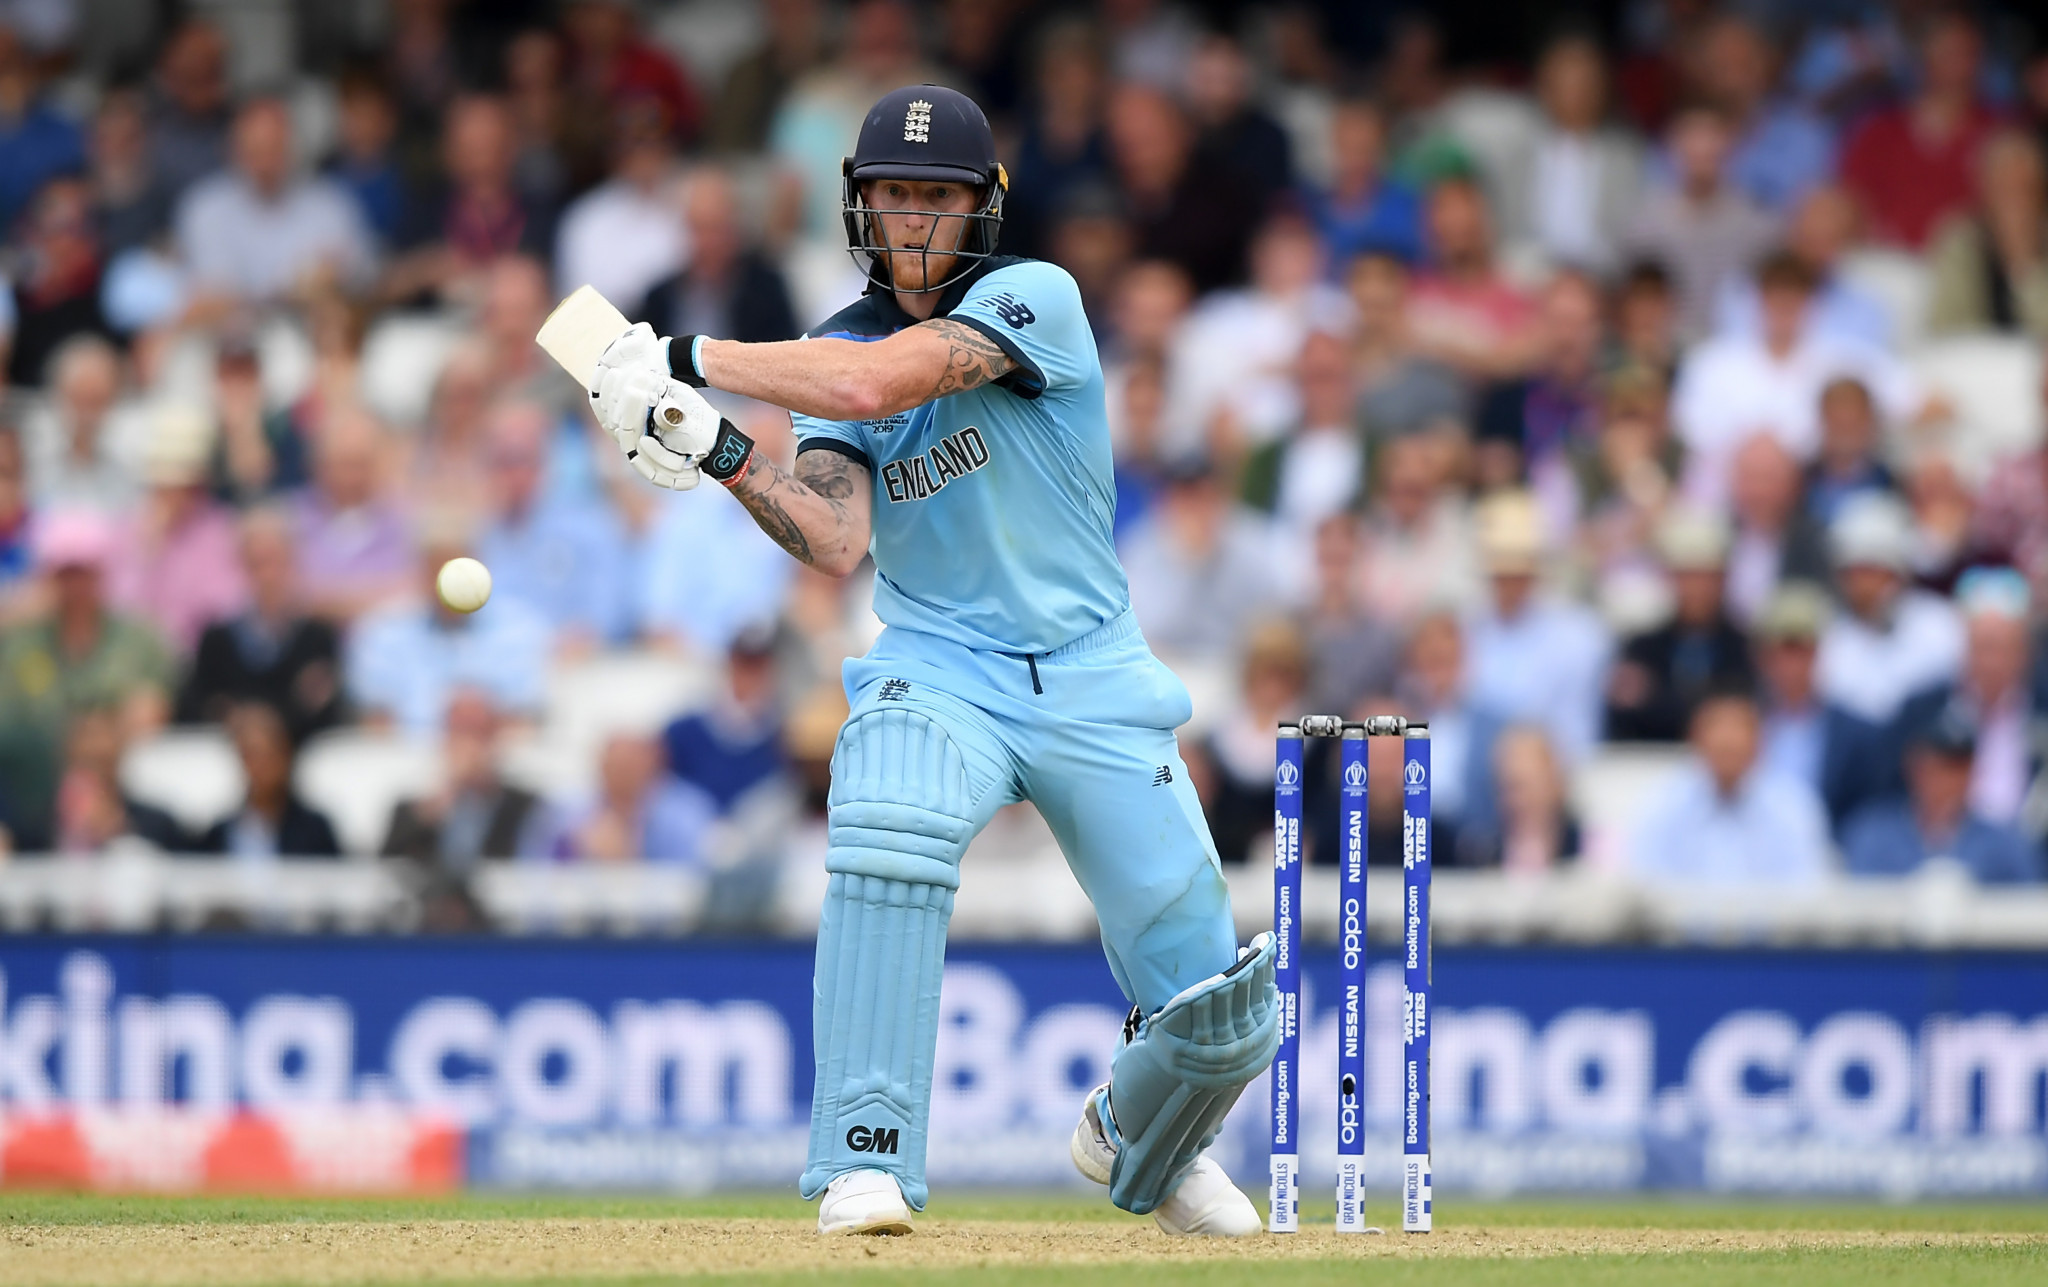 Ben Stokes starred for England with bat and ball - and in the field with a breathtaking catch - as they beat South Africa by more than 100 runs in their opening match of the ICC Cricket World Cup ©Getty Images